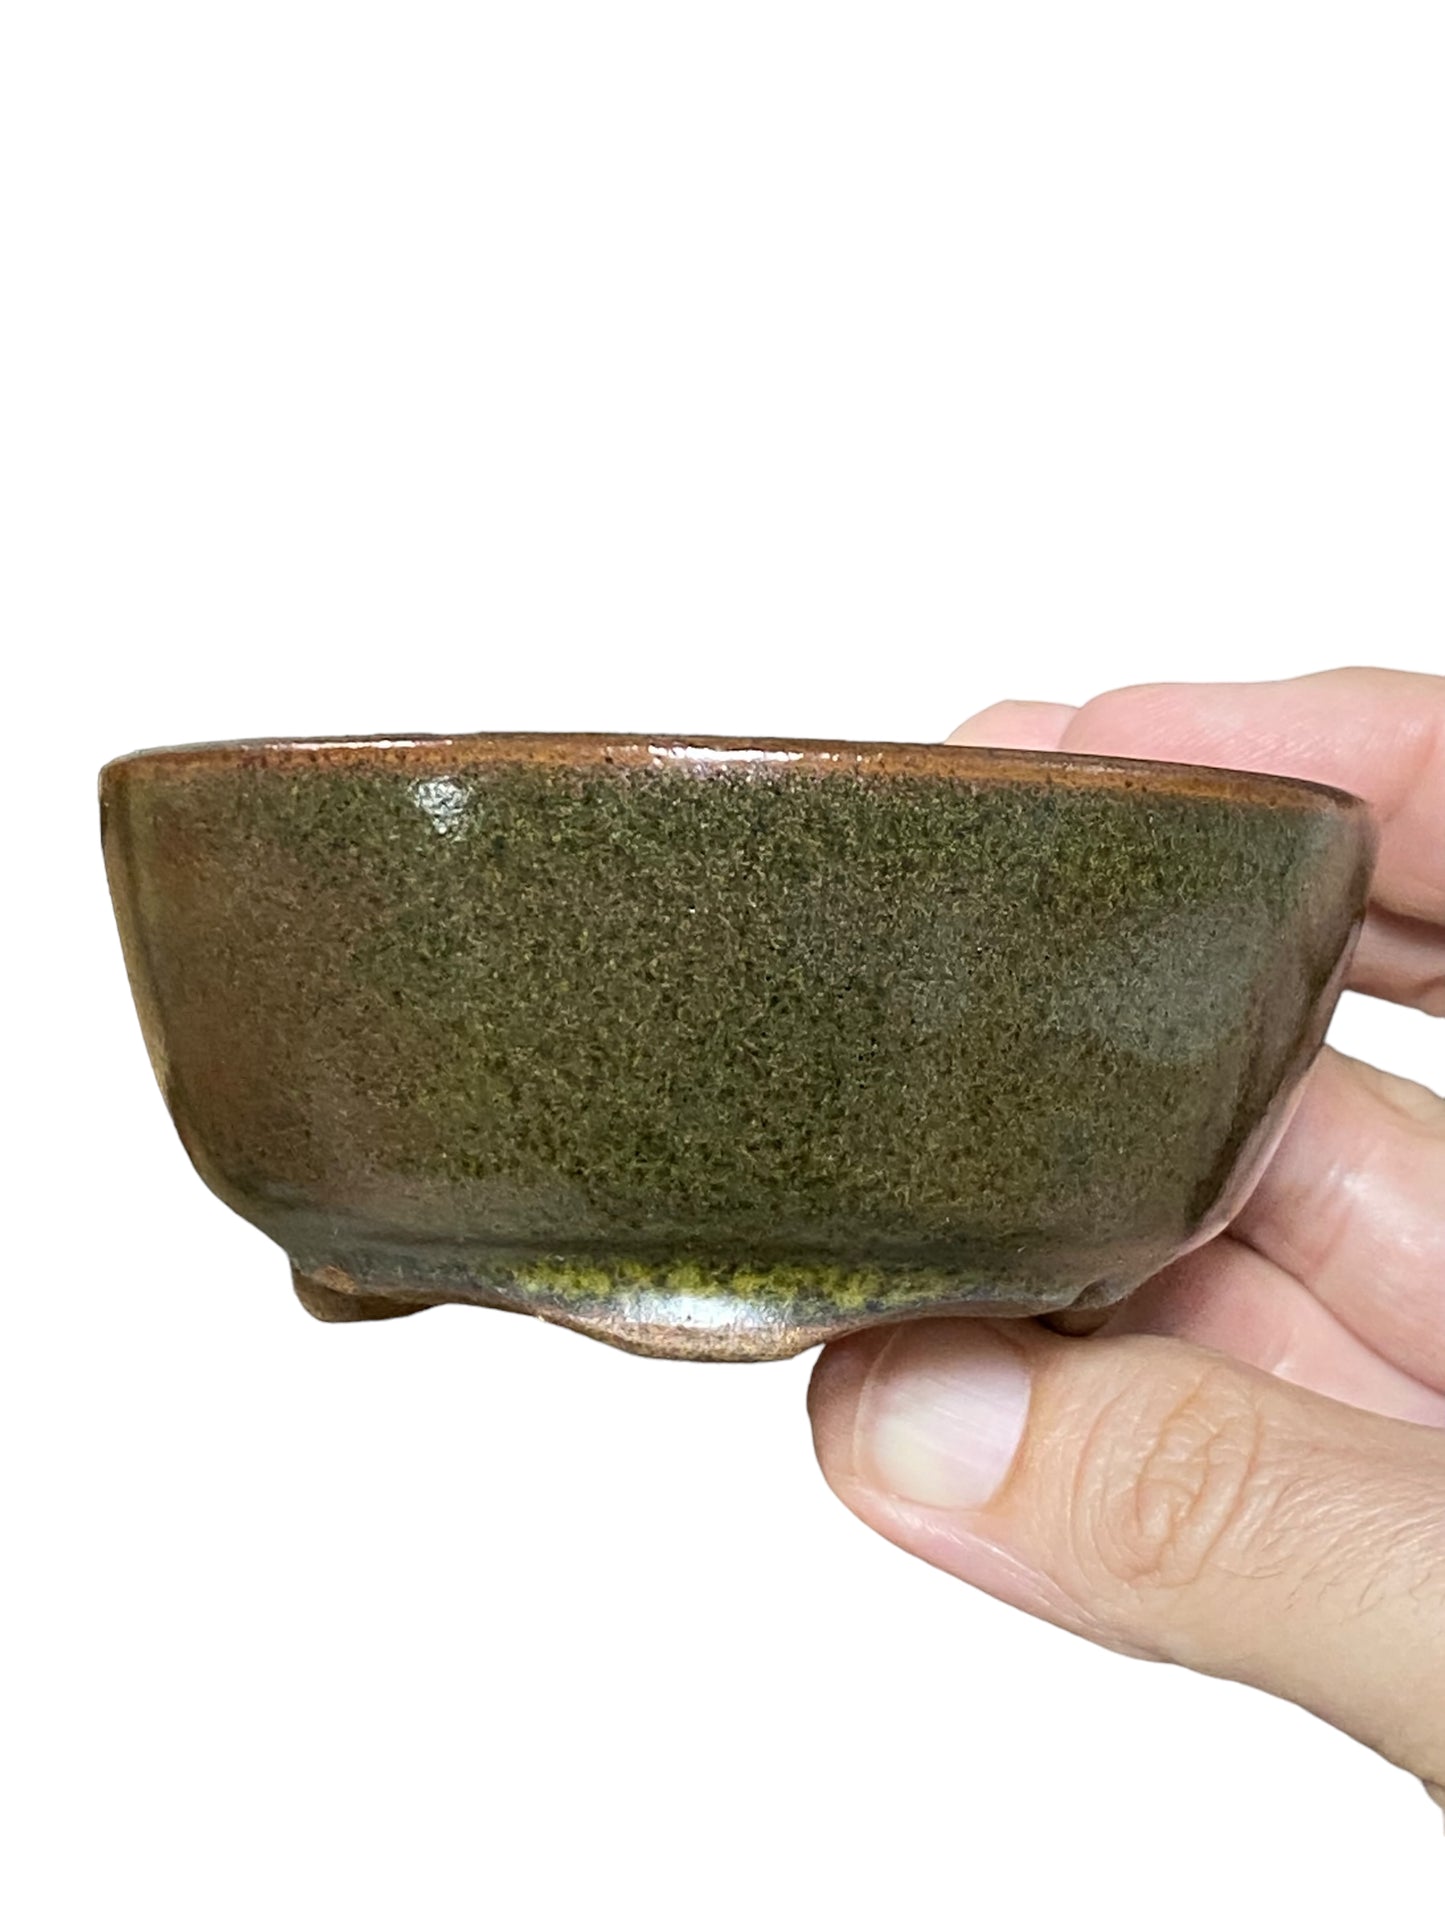 Isso - Green and Red Glazed Bowl Bonsai or Accent Pot